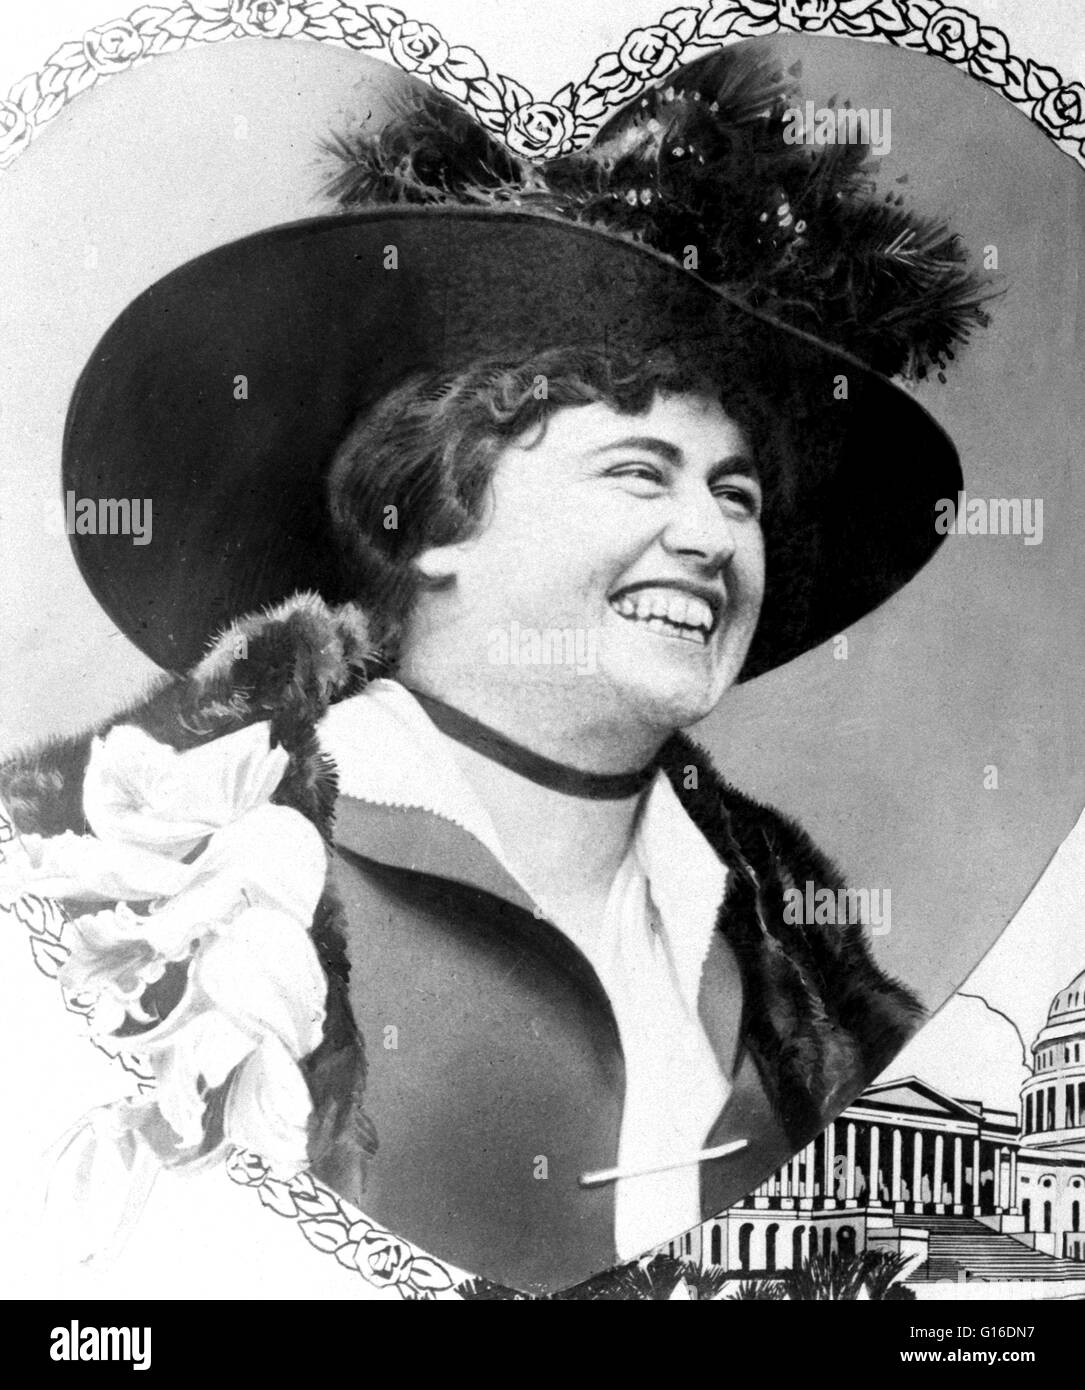 Edith Bolling Galt Wilson (October 15, 1872 - December 28, 1961) was the second wife of Woodrow Wilson, and First Lady of the United States from 1915 to 1921. Through her father, Edith was a direct descendant of Pocahontas, the daughter of the chief of th Stock Photo